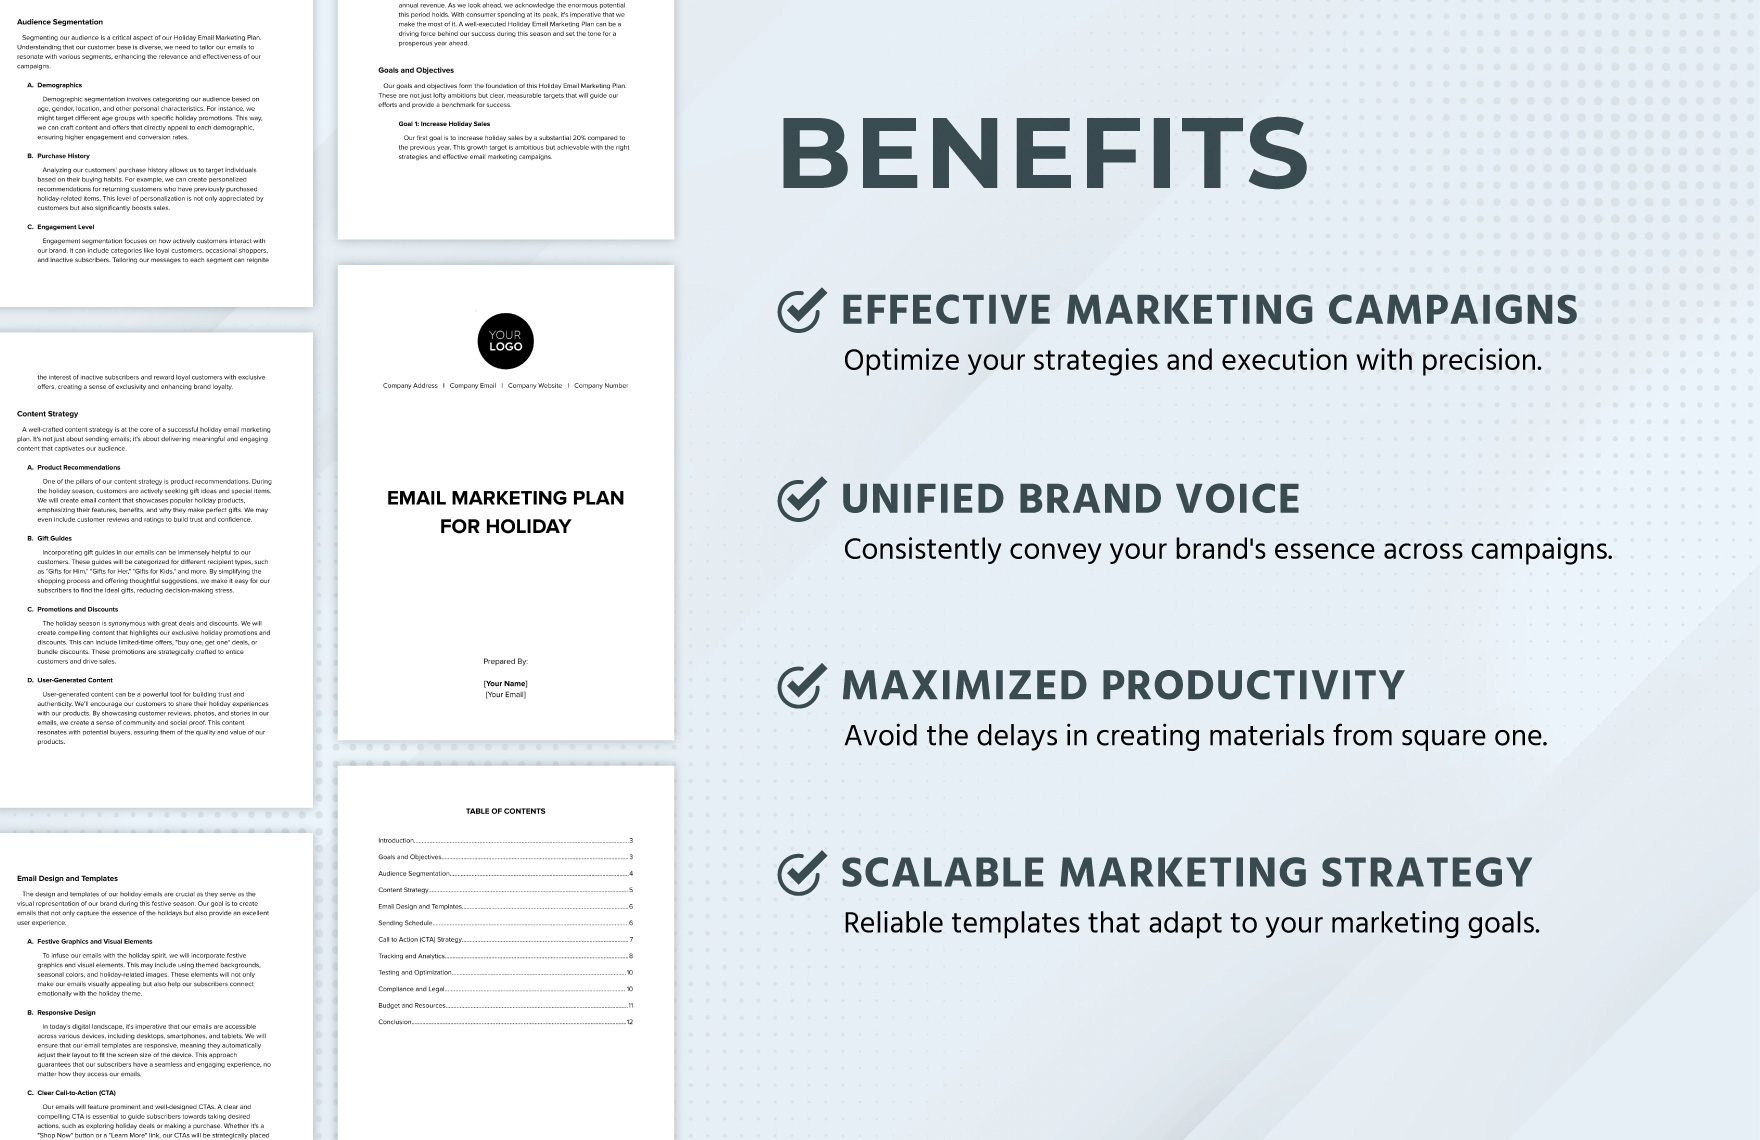 Email Marketing Plan for Holiday Template